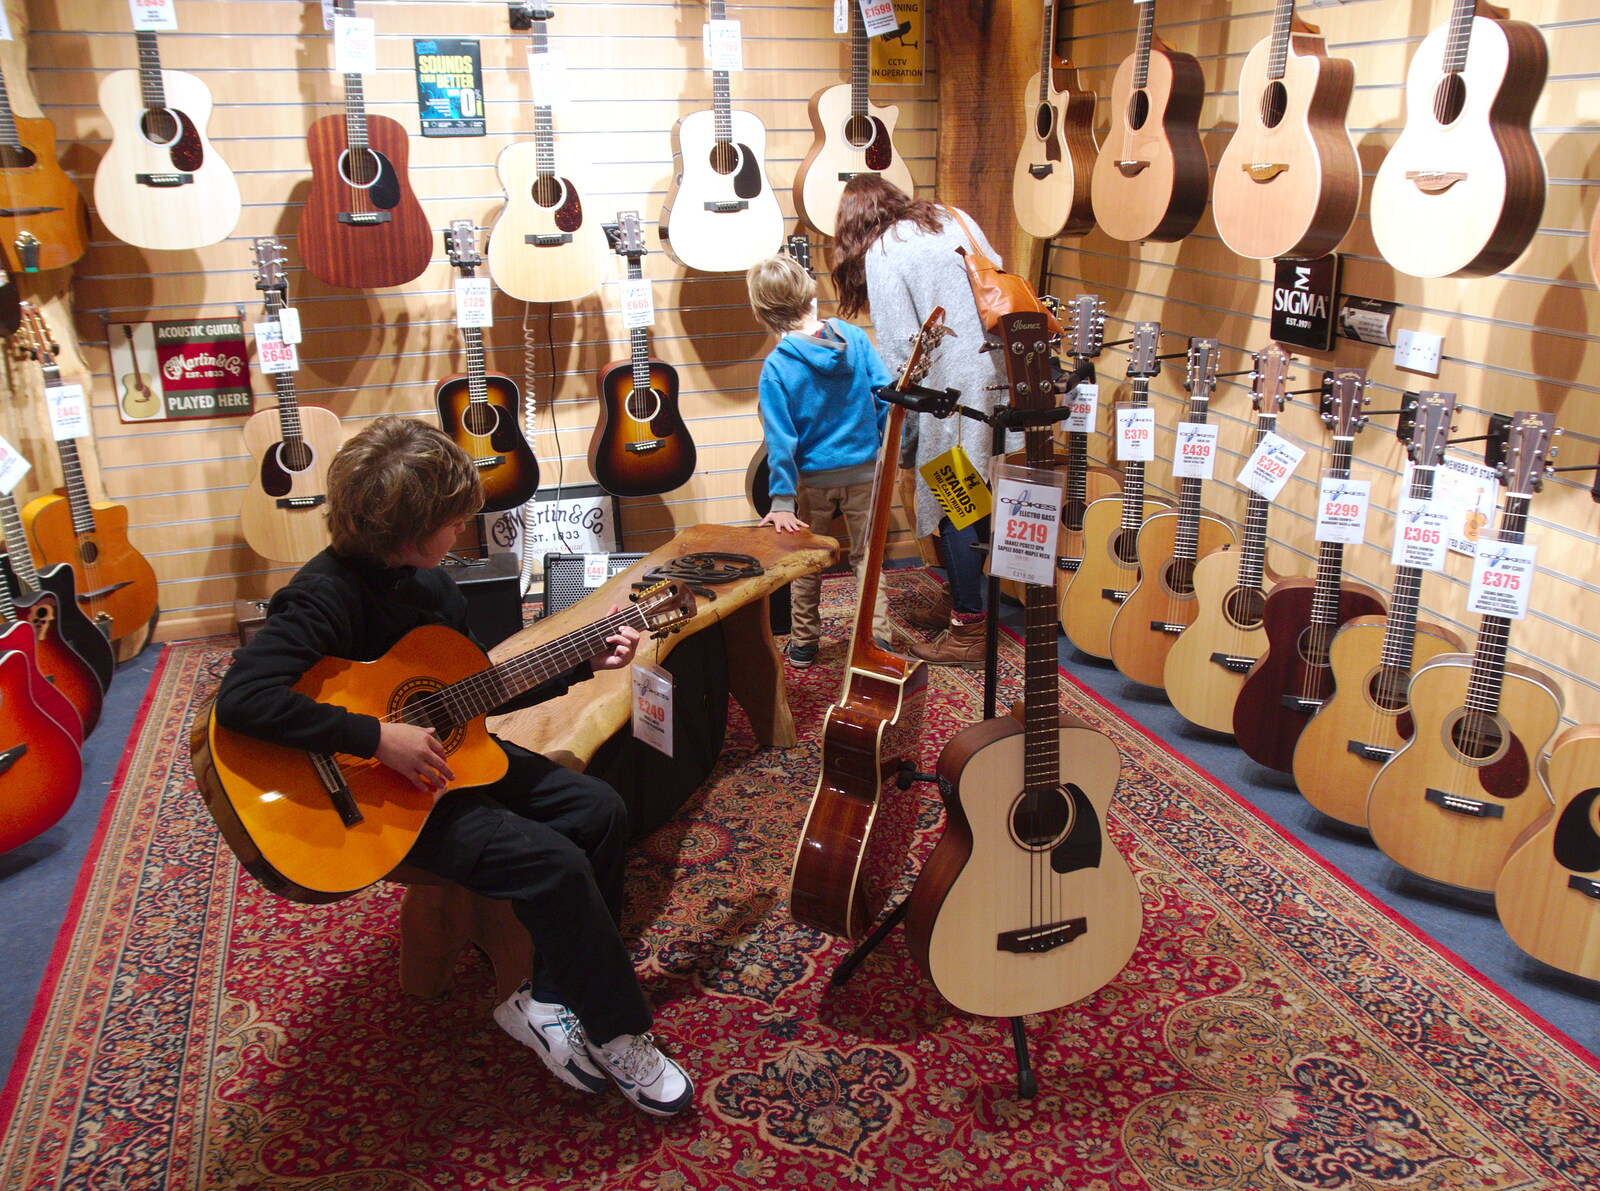 Fred and Harry try guitars in Cooke's from A Trip up the Big City, Norwich, Norfolk - 18th October 2019